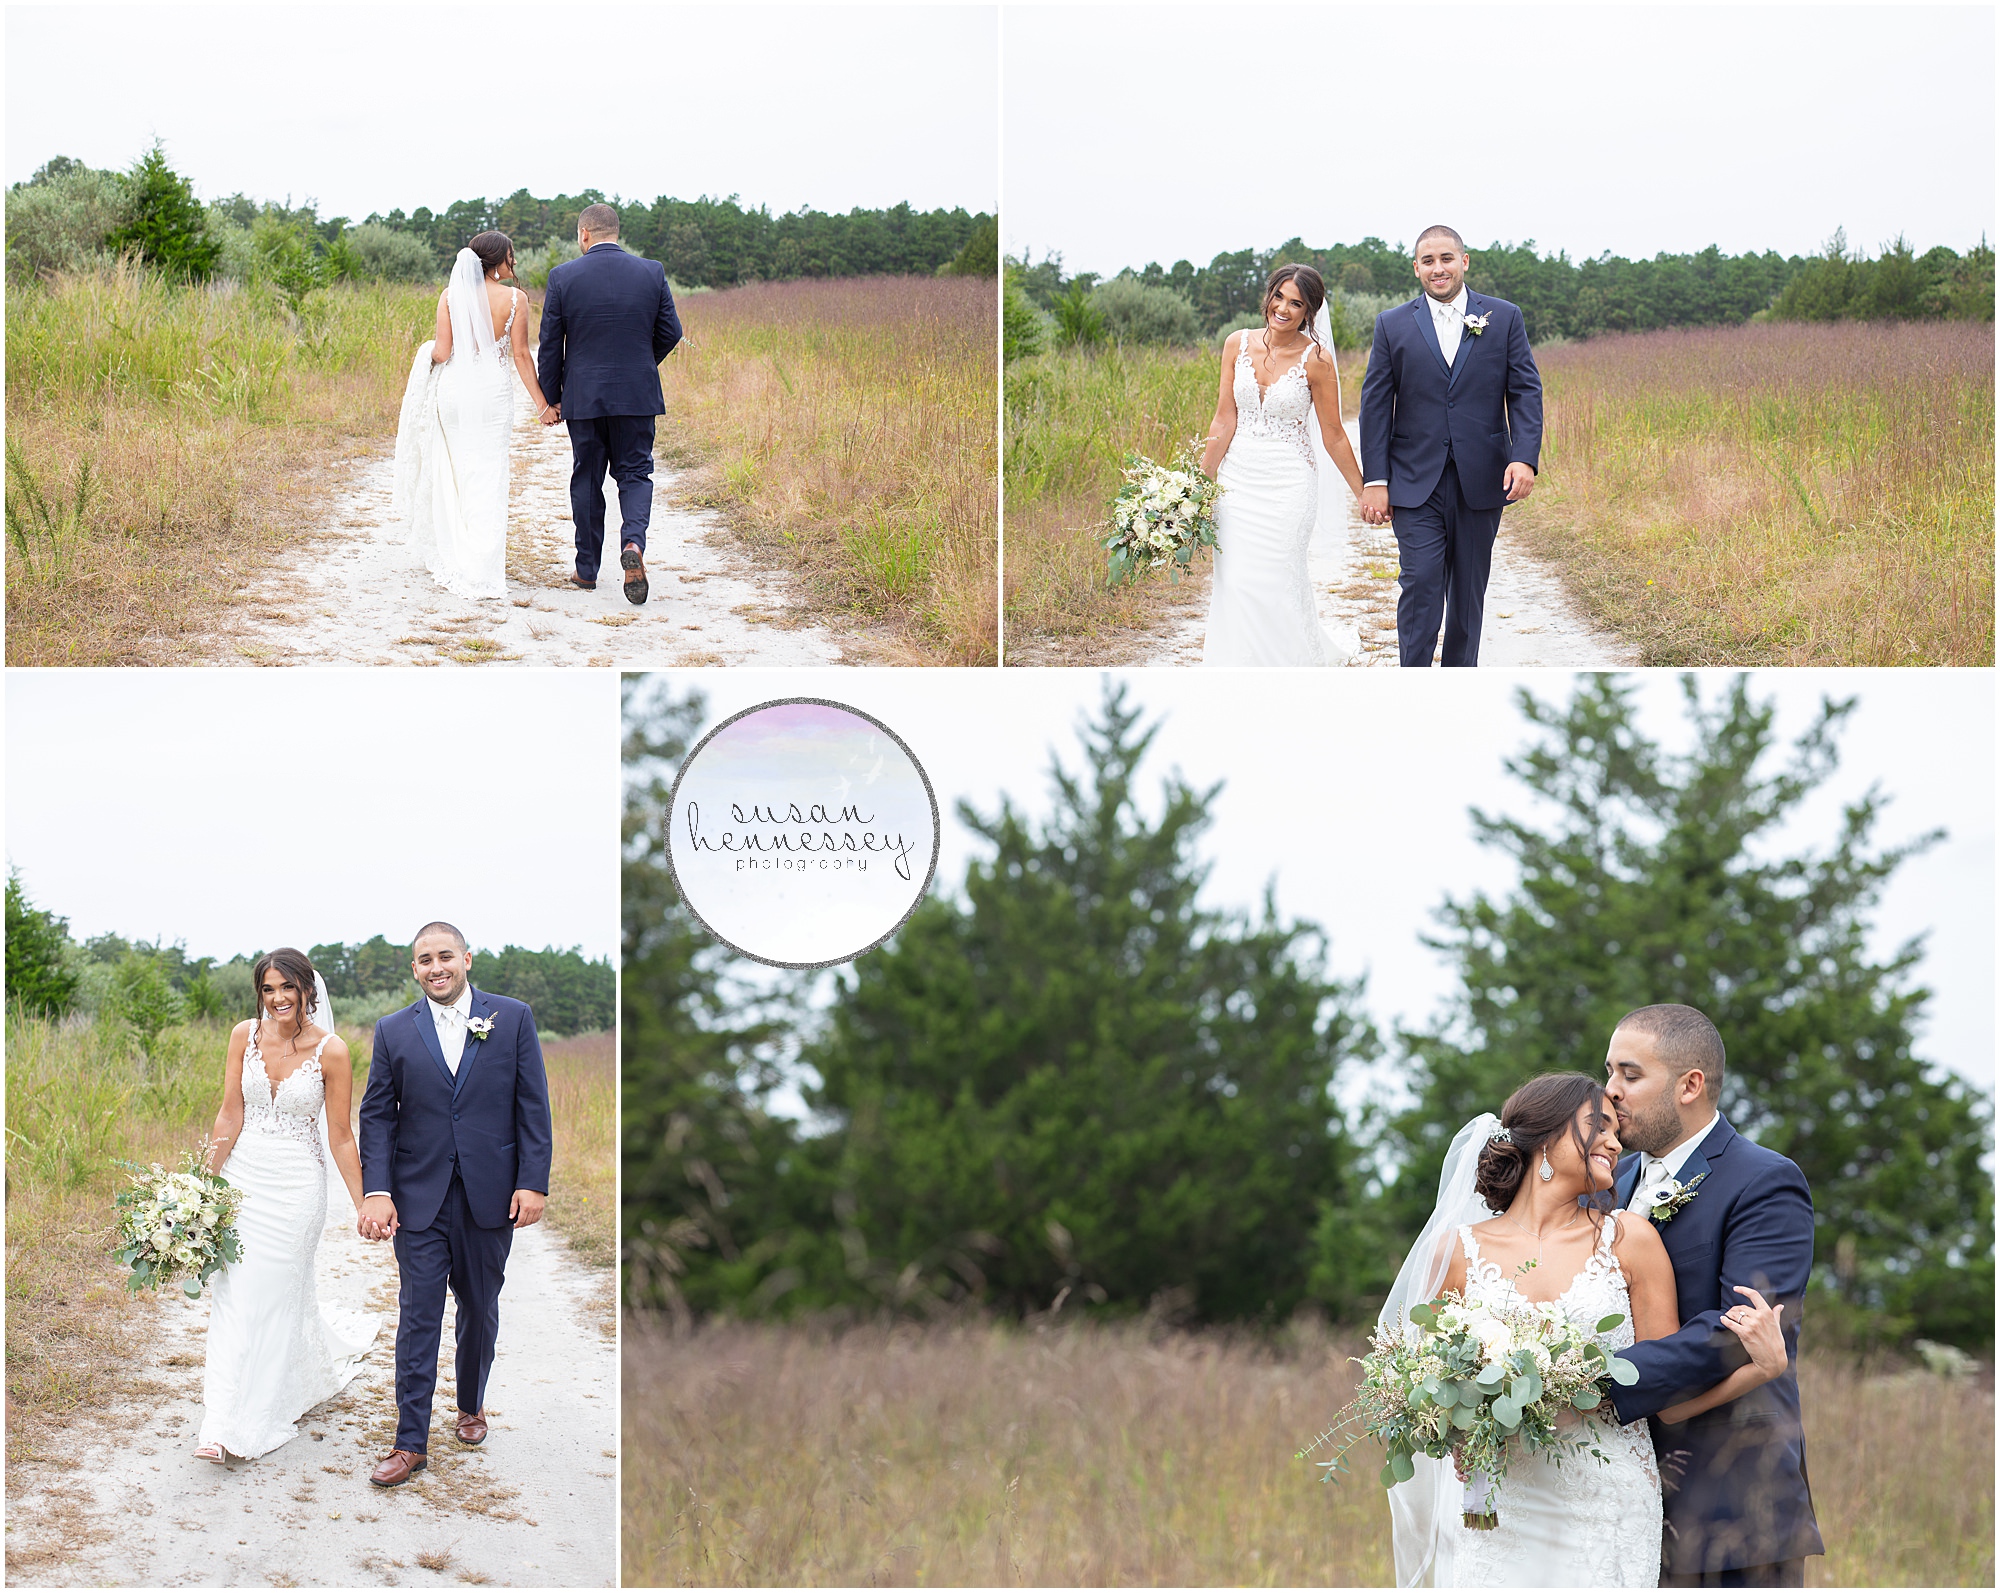 Renault Winery in Egg Harbor is one of the best Wedding Venues in South Jersey because the grounds are stunning for portraits!